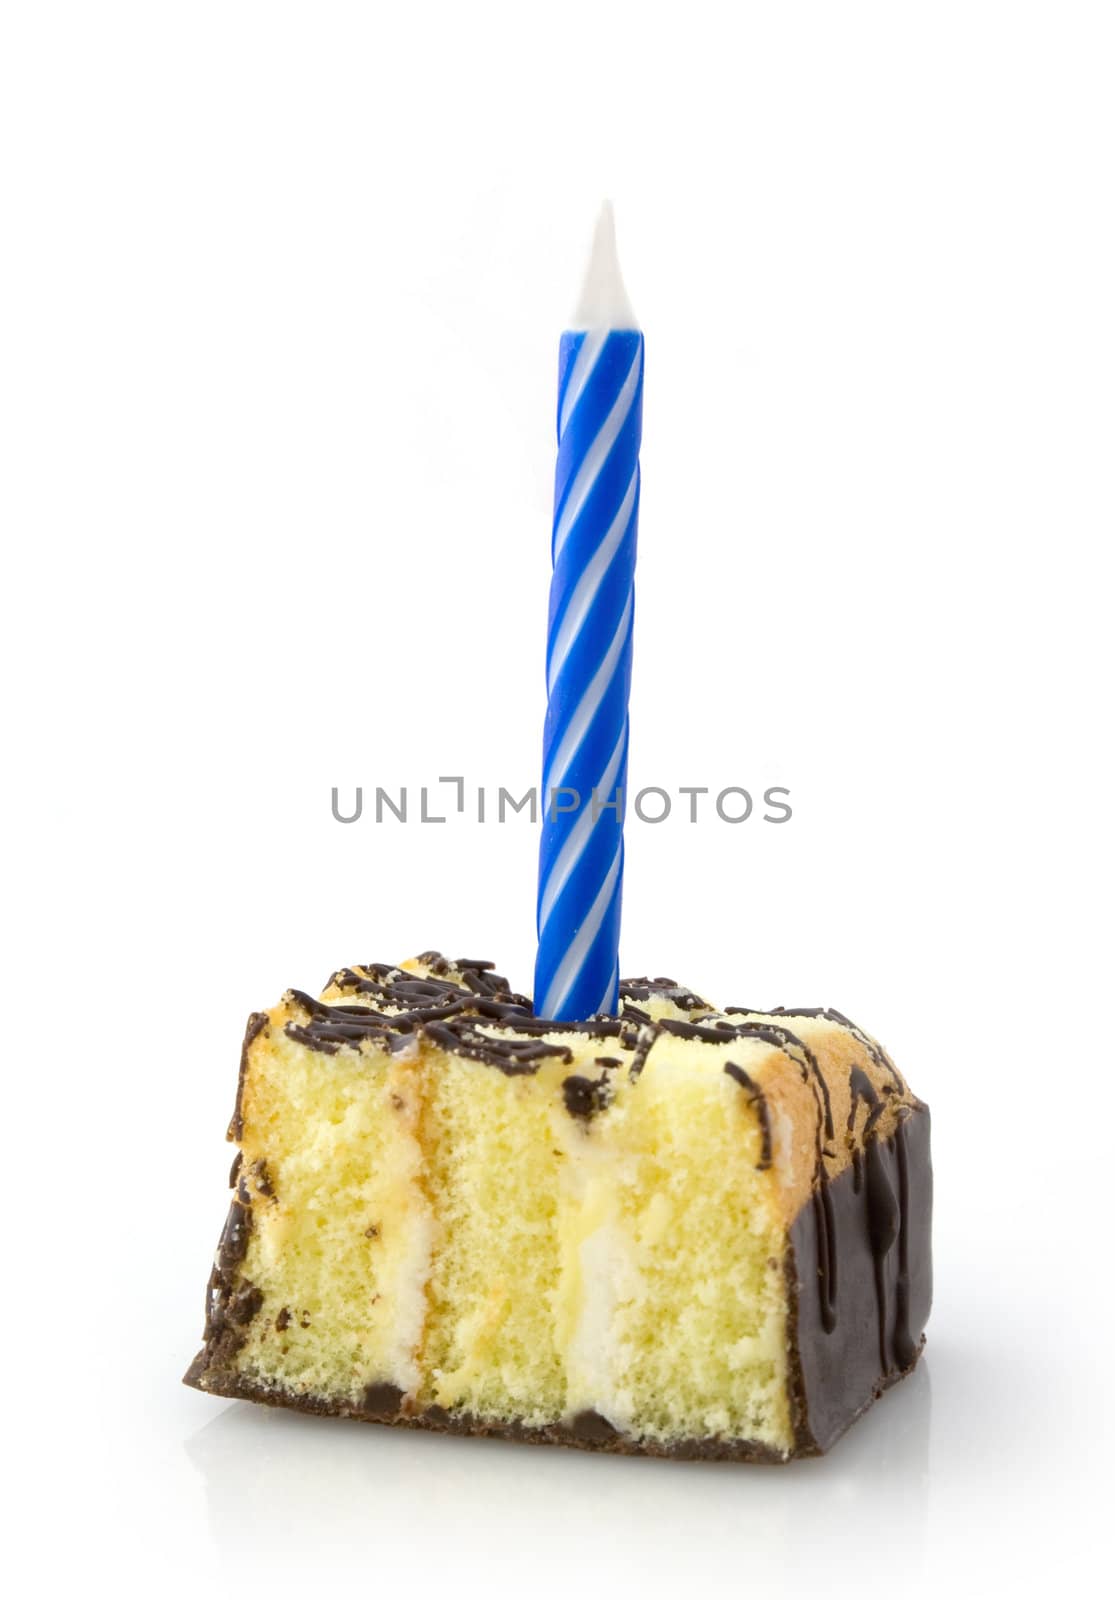 Small cake with blue candle